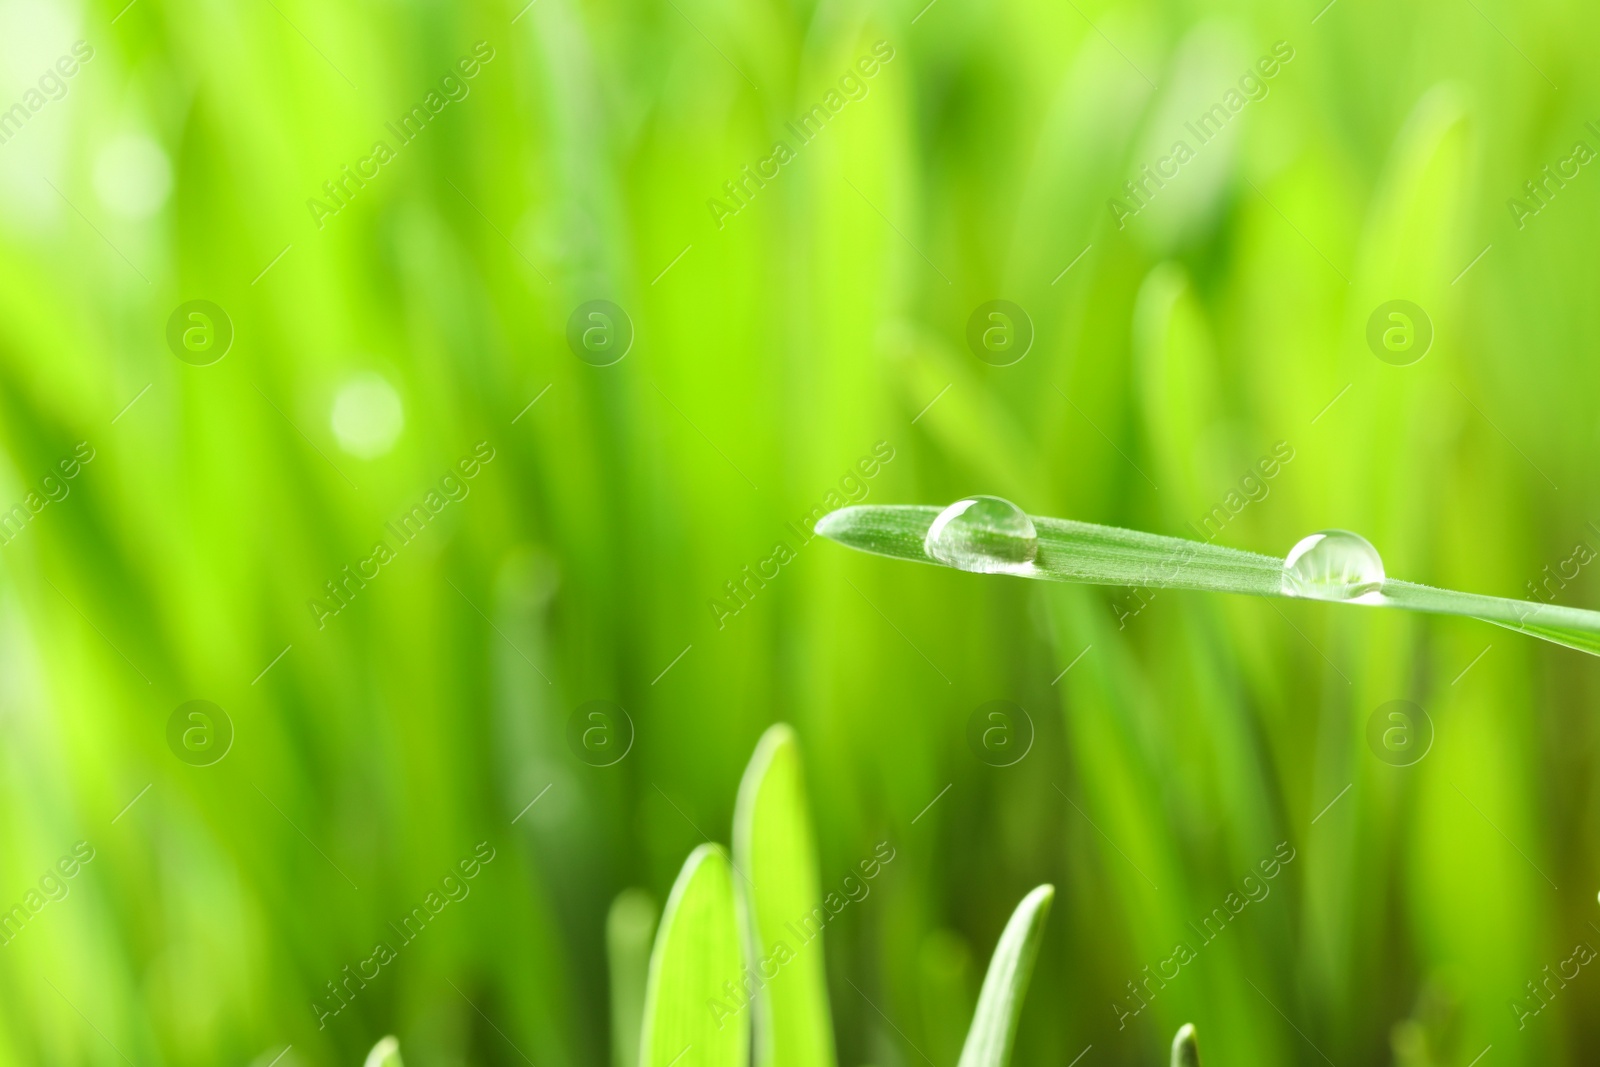 Photo of Water drops on grass blade against blurred background, closeup